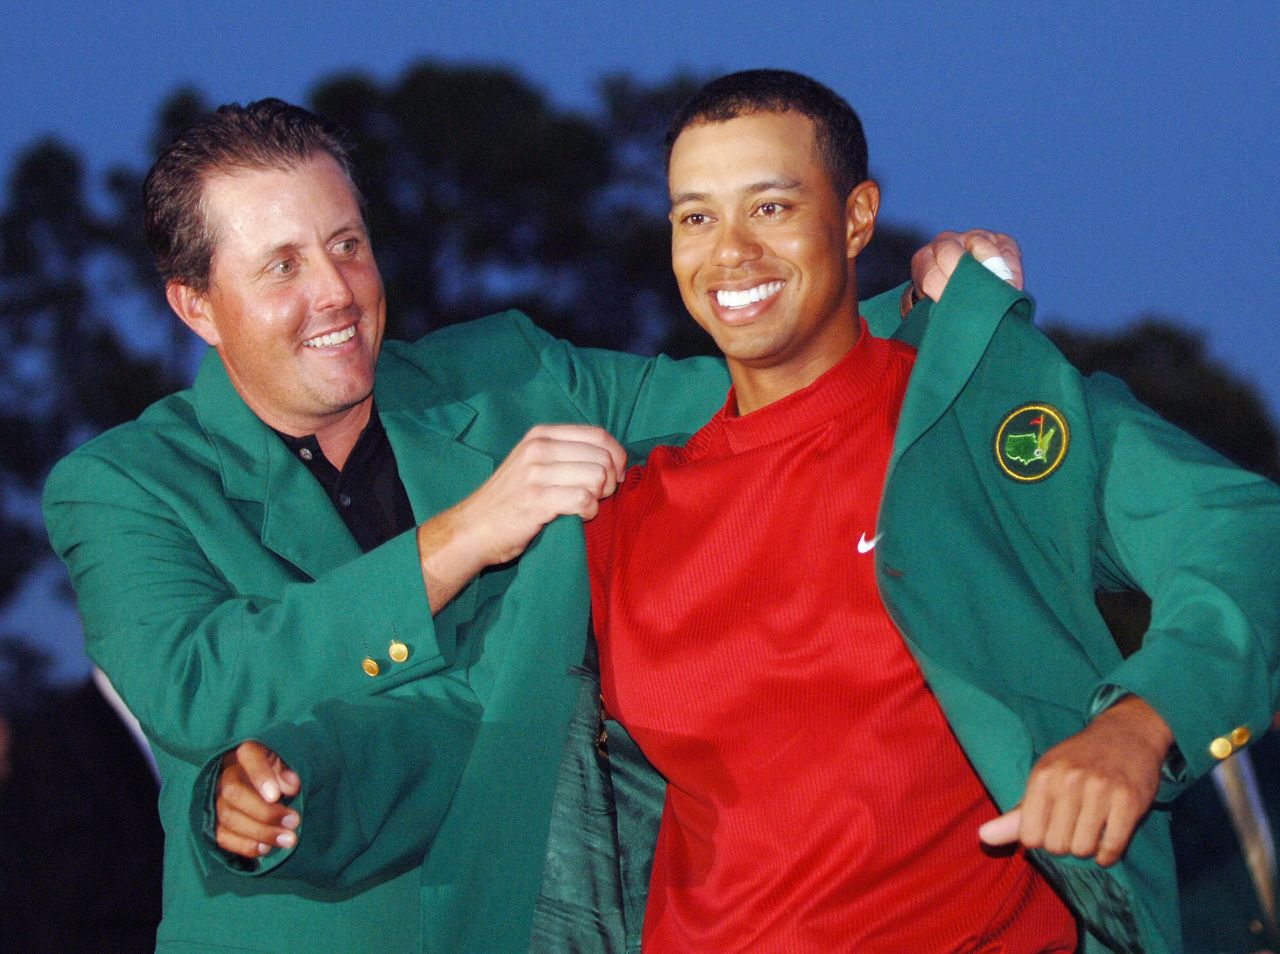 When Tiger Woods beat Chris Di Marco in a playoff to clinch a fourth Masters crown back in 2005, it was his ninth career major. It seemed unthinkable then that he'd go another 10 years without winning another green jacket, and in that time, all this has happened...